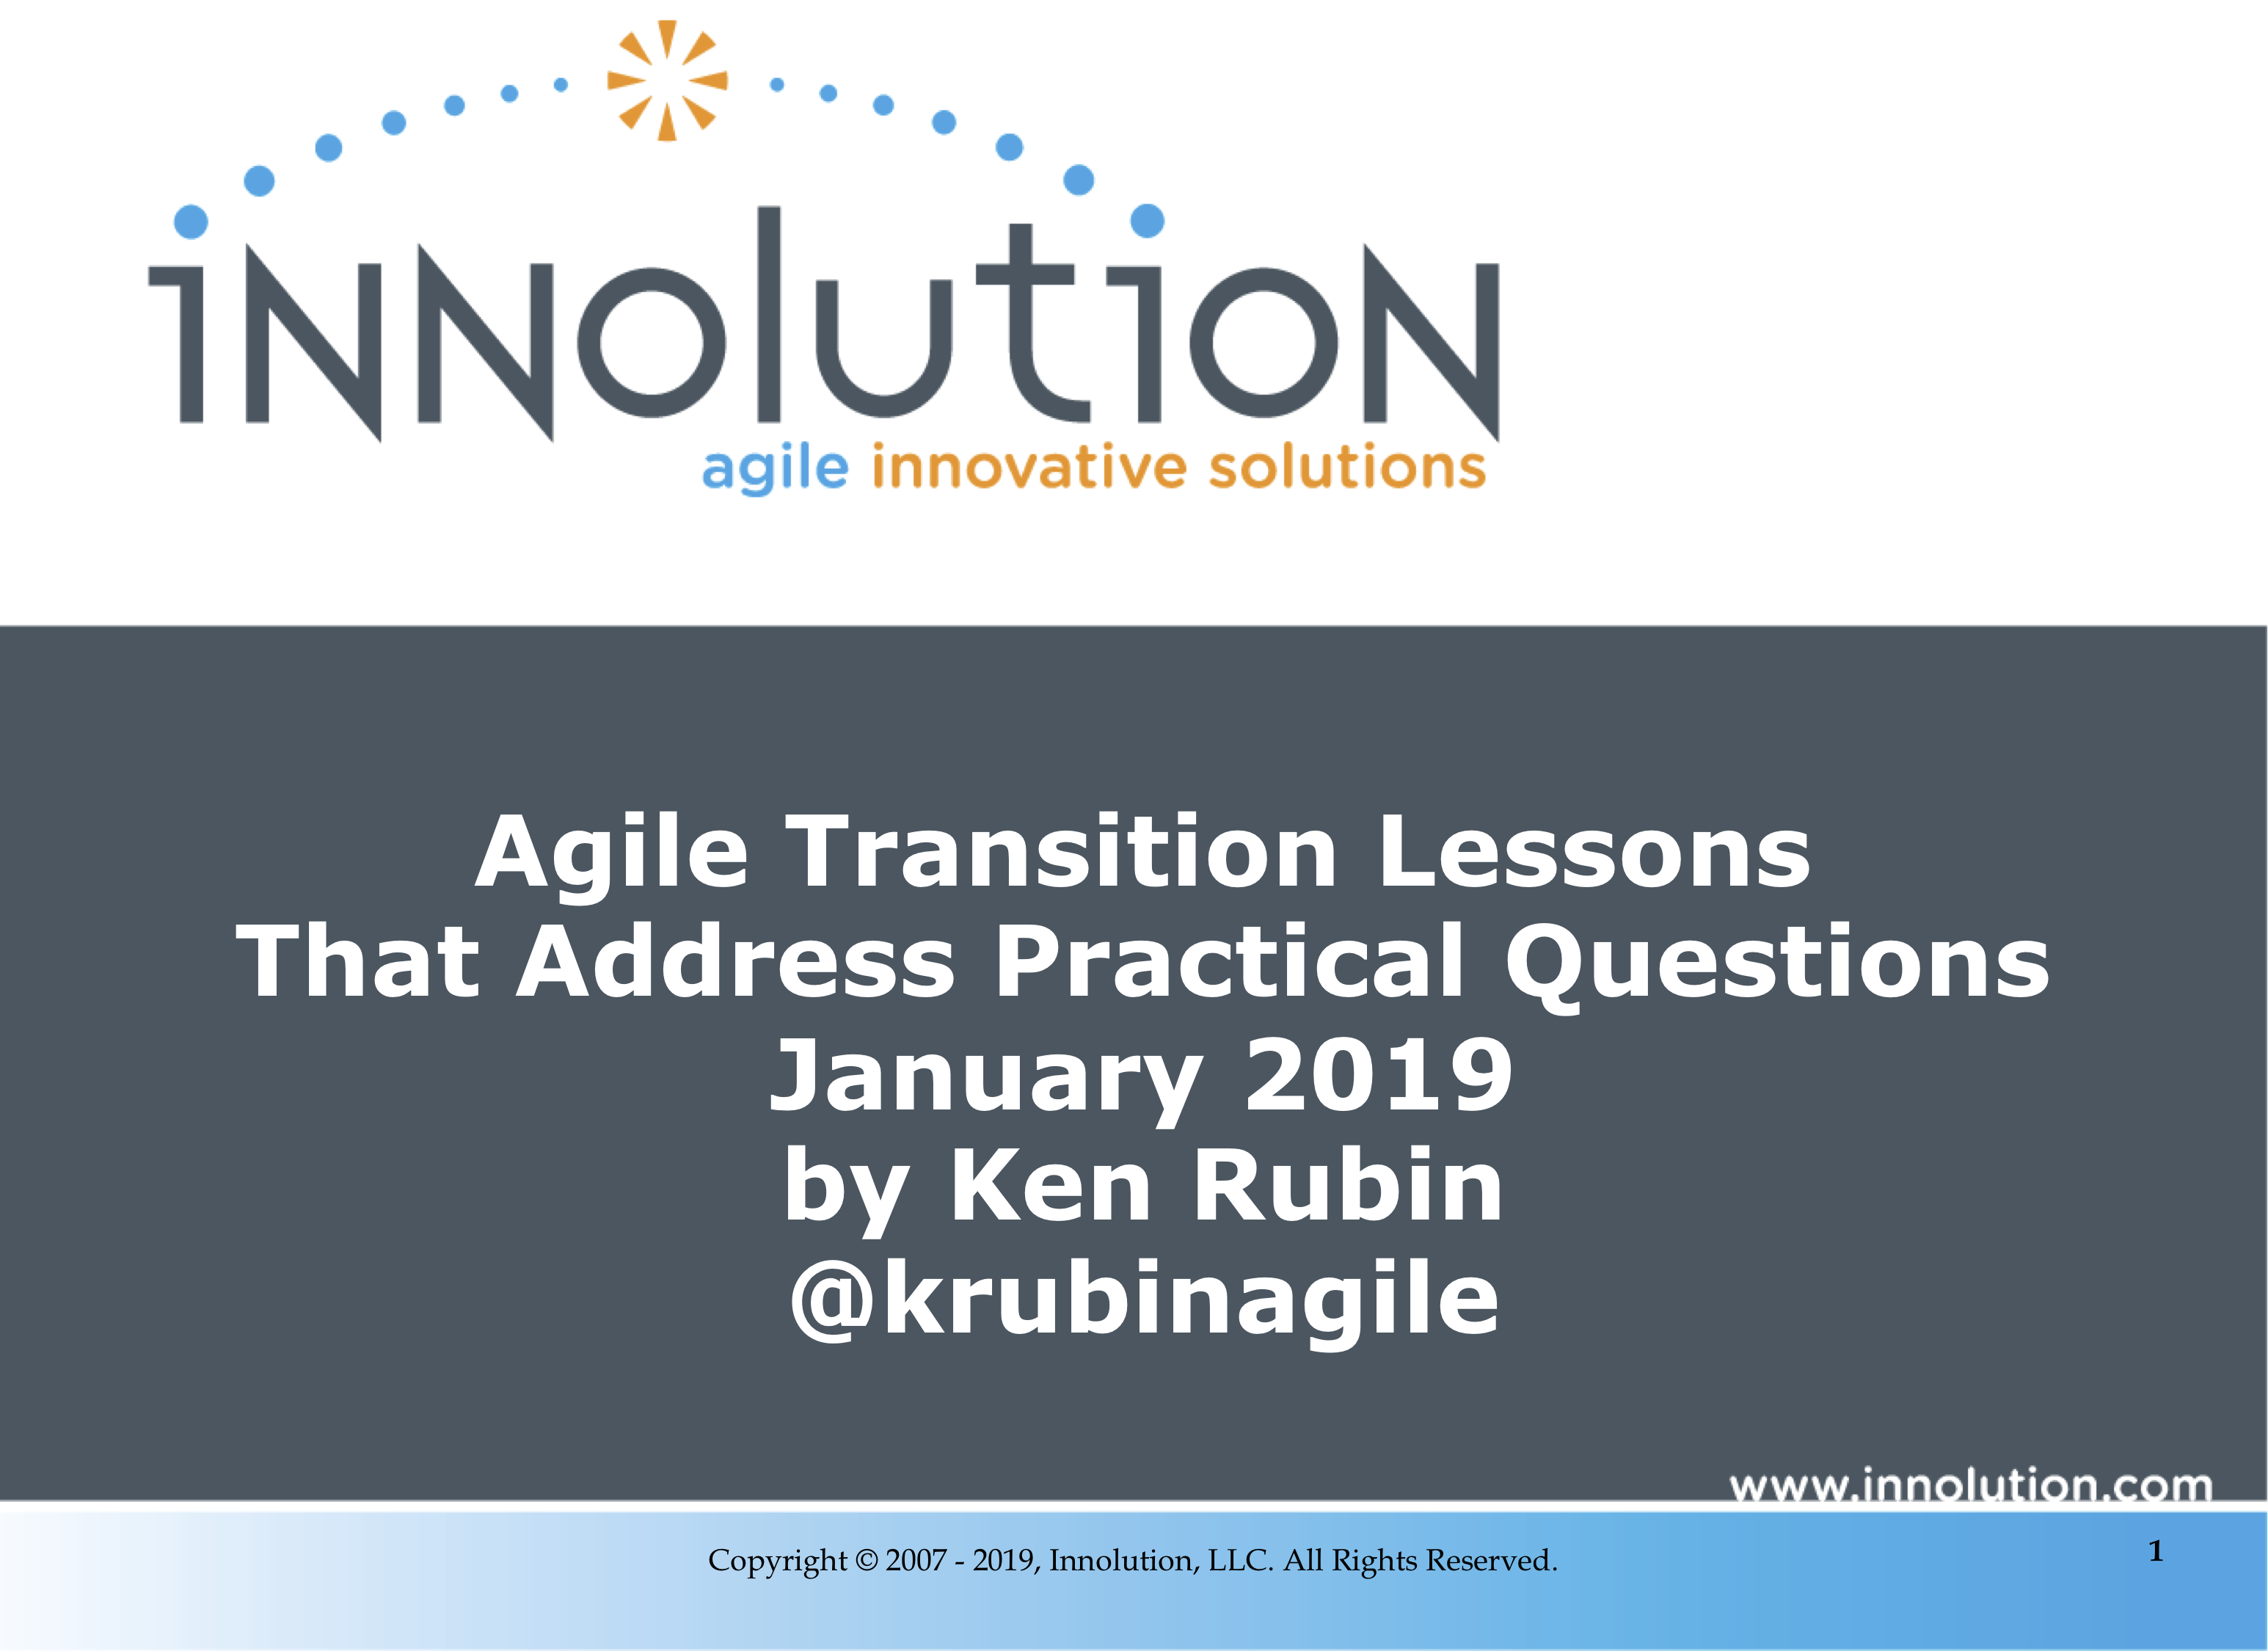 Jan 2019 - Agile Transition Lessons That Address Practical Questions